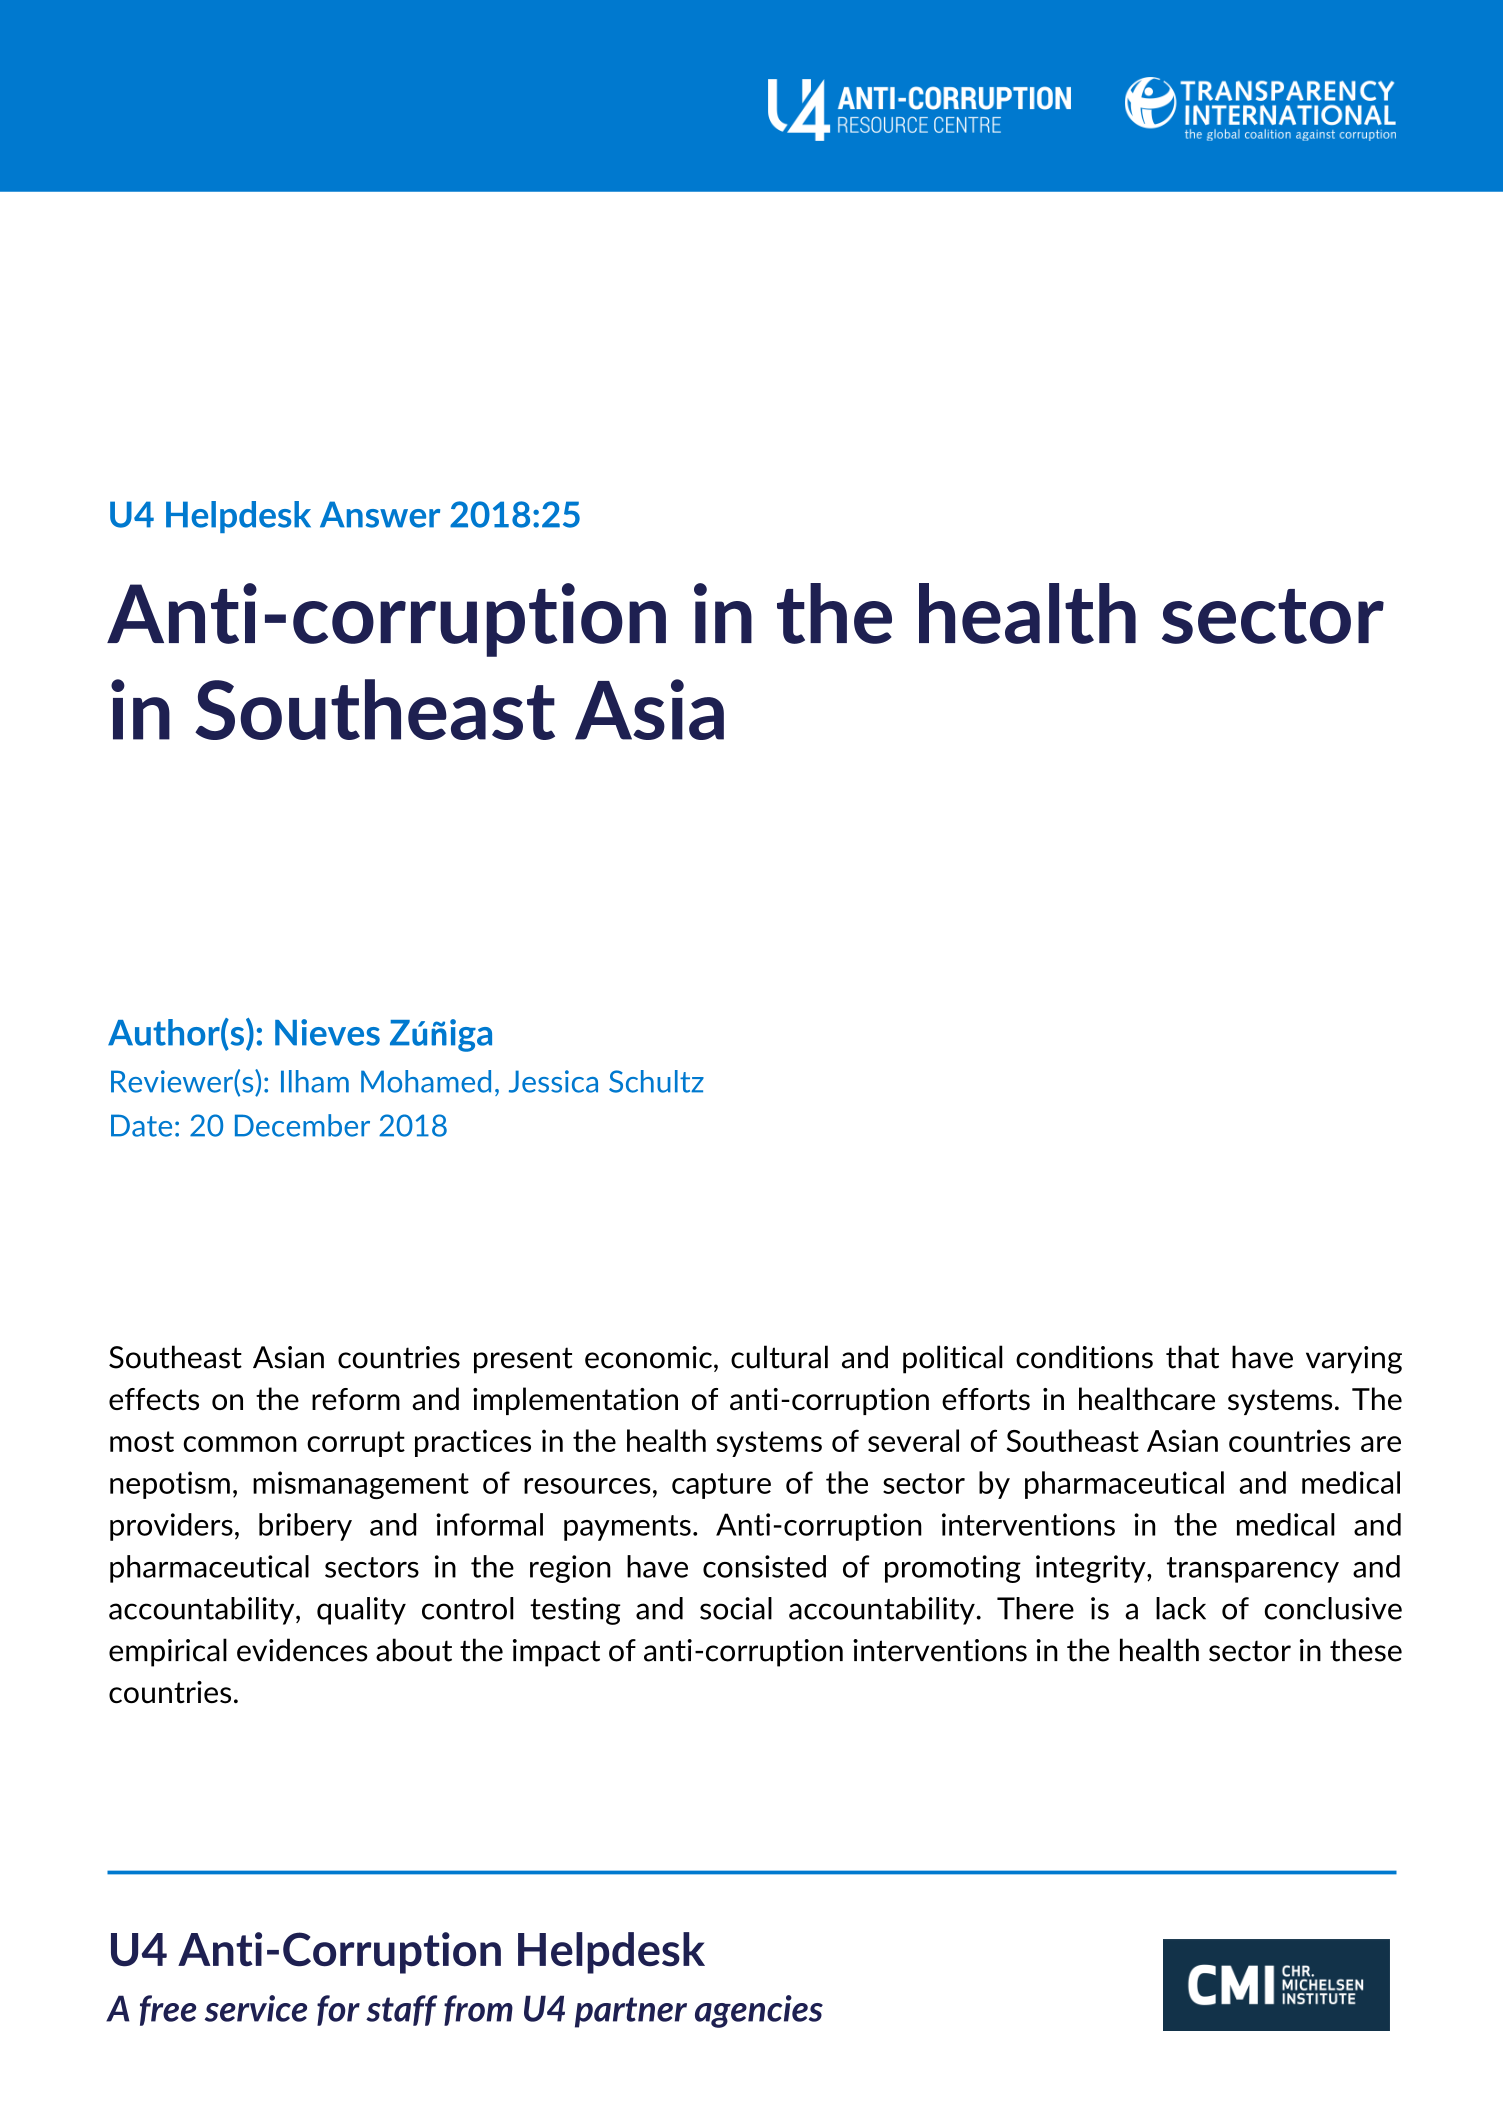 Anti-corruption in the health sector in Southeast Asia